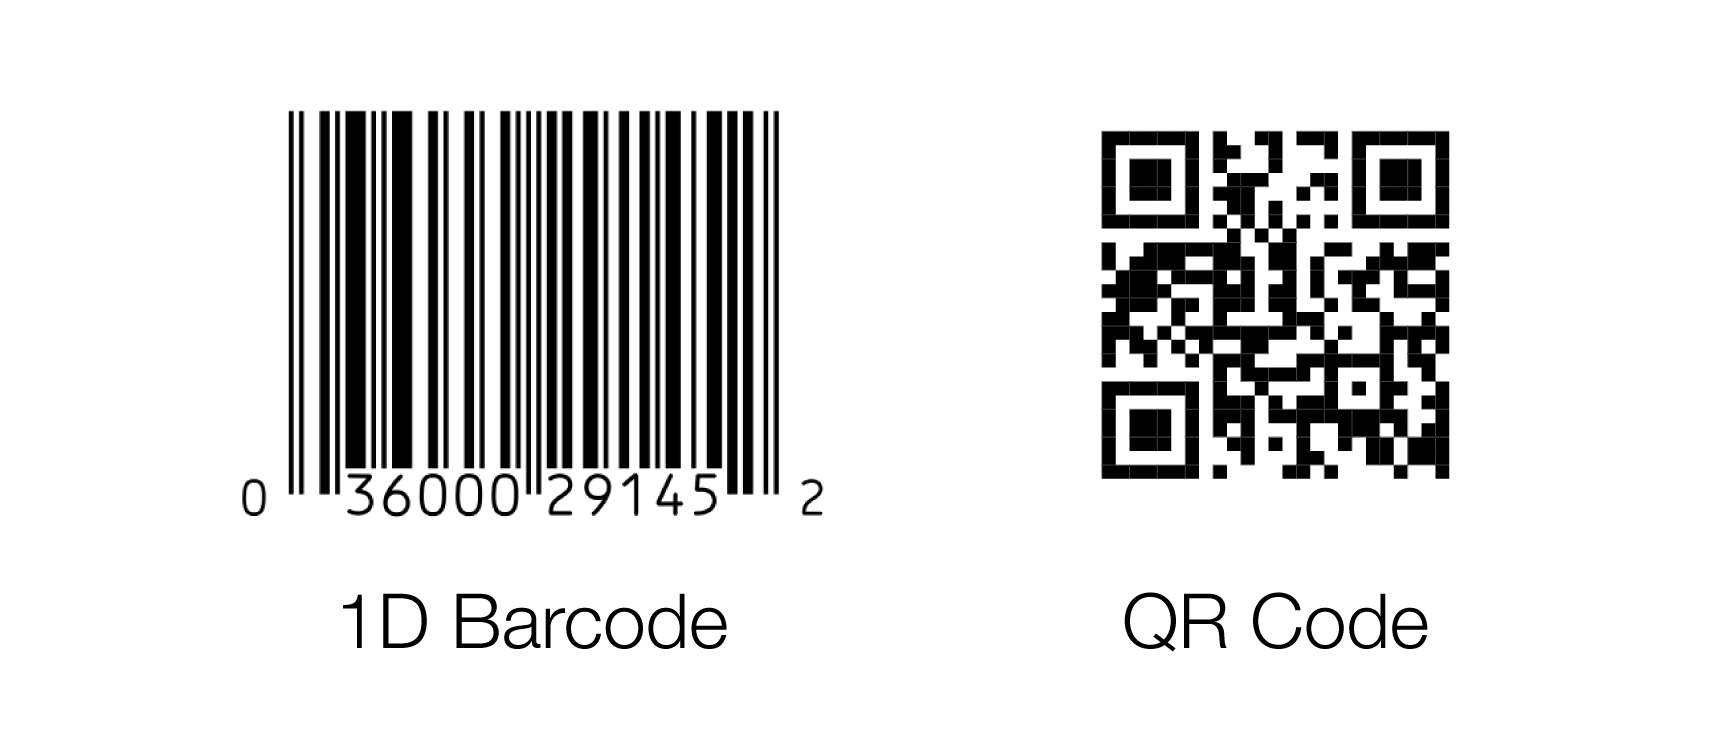 RTCHubs_QR_Code_Scanner_Products